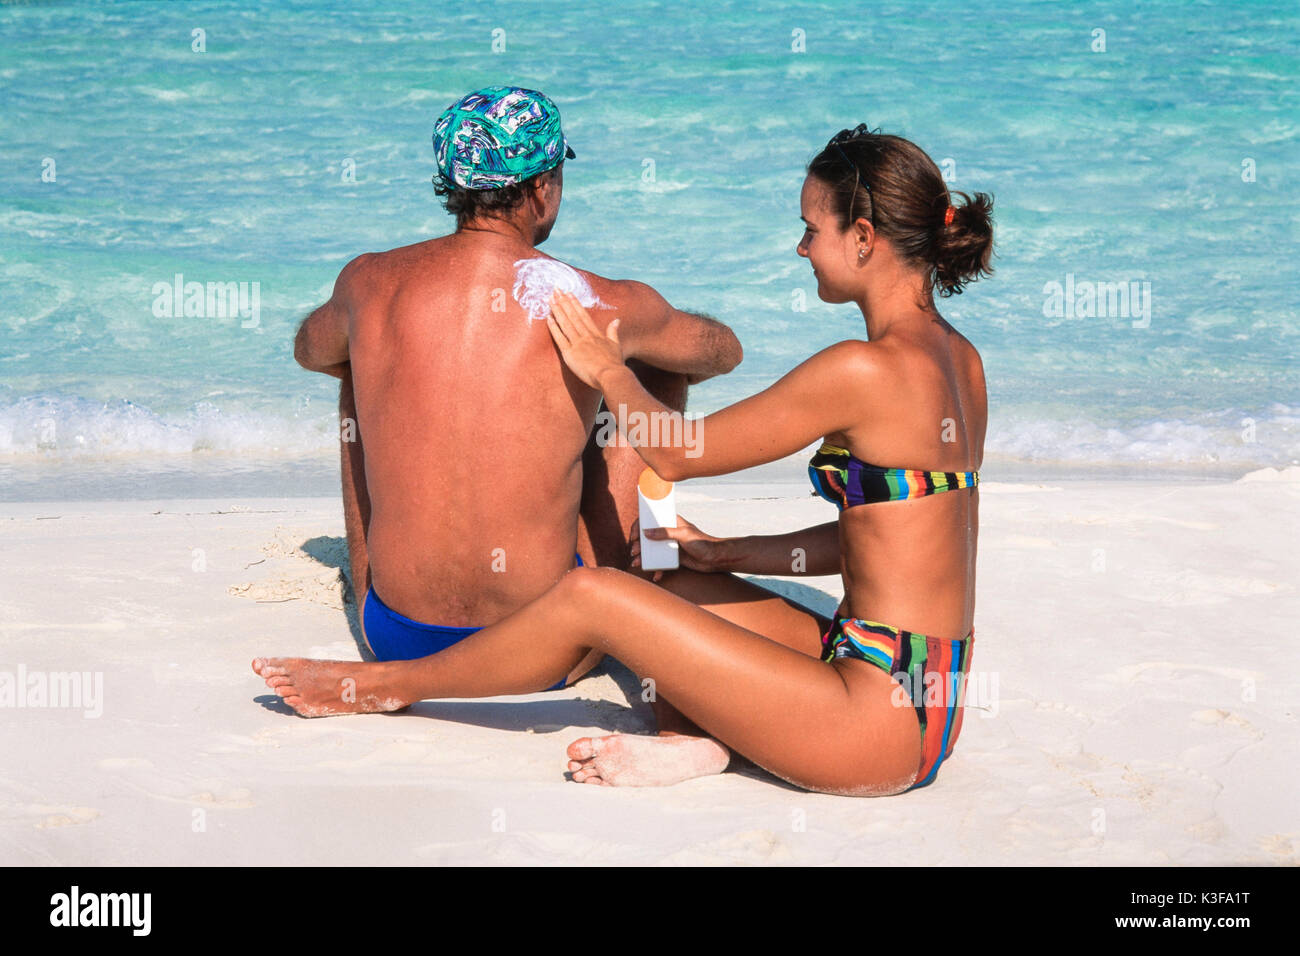 Woman creams man the back with sun lotion Stock Photo